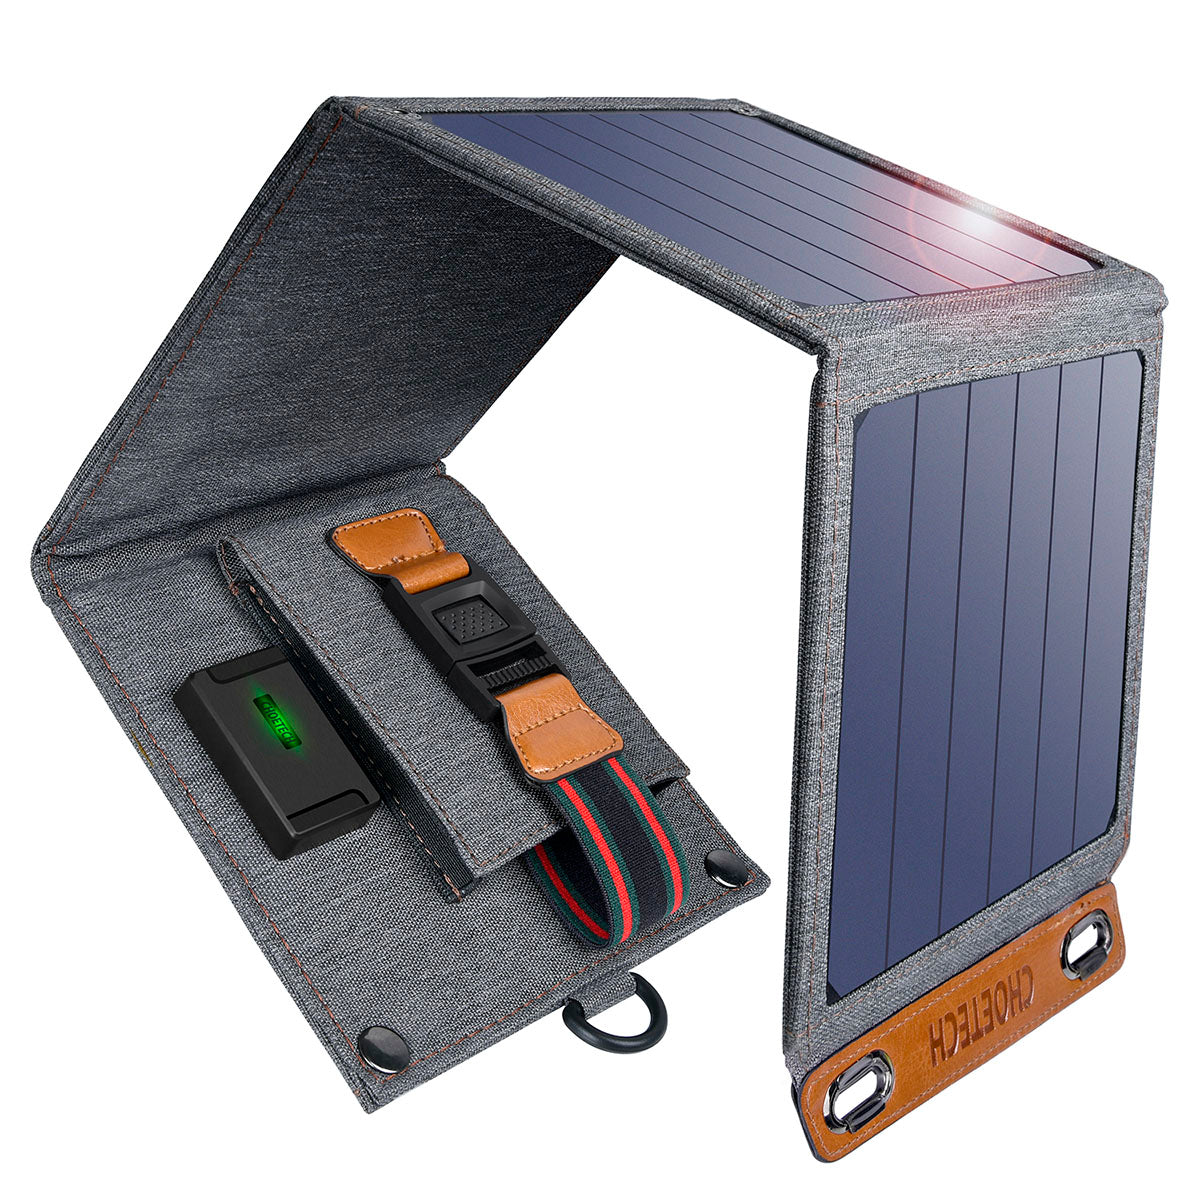 Choetech 14W Solar Powered Phone Charger SC004